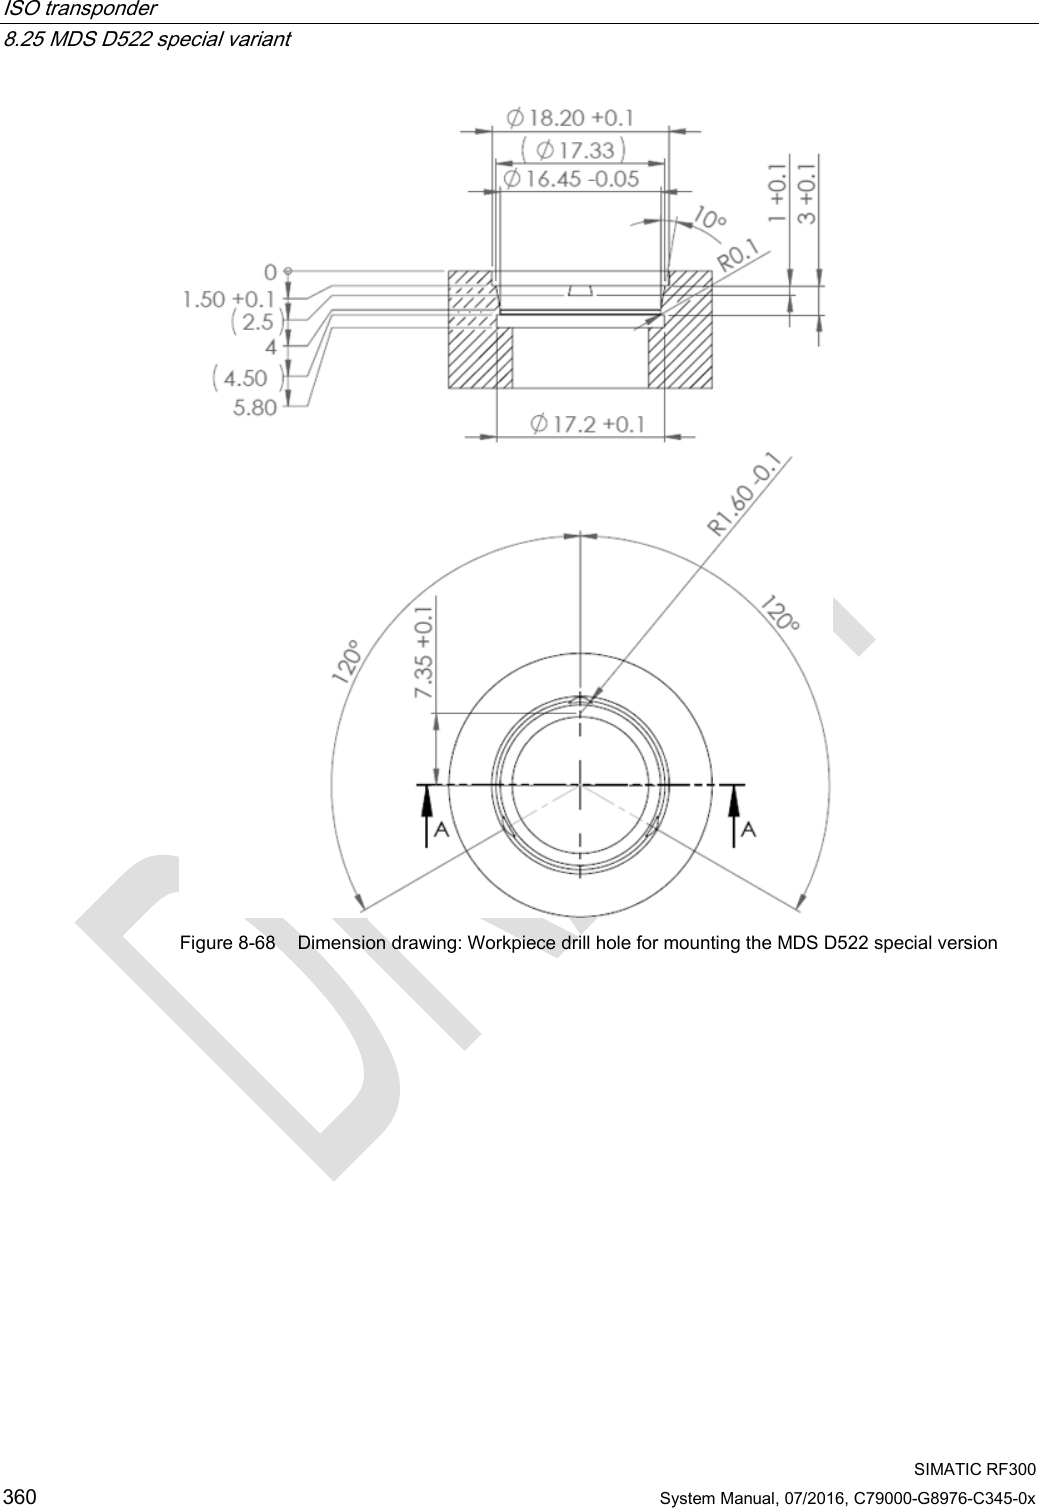 ISO transponder   8.25 MDS D522 special variant  SIMATIC RF300 360 System Manual, 07/2016, C79000-G8976-C345-0x  Figure 8-68 Dimension drawing: Workpiece drill hole for mounting the MDS D522 special version 